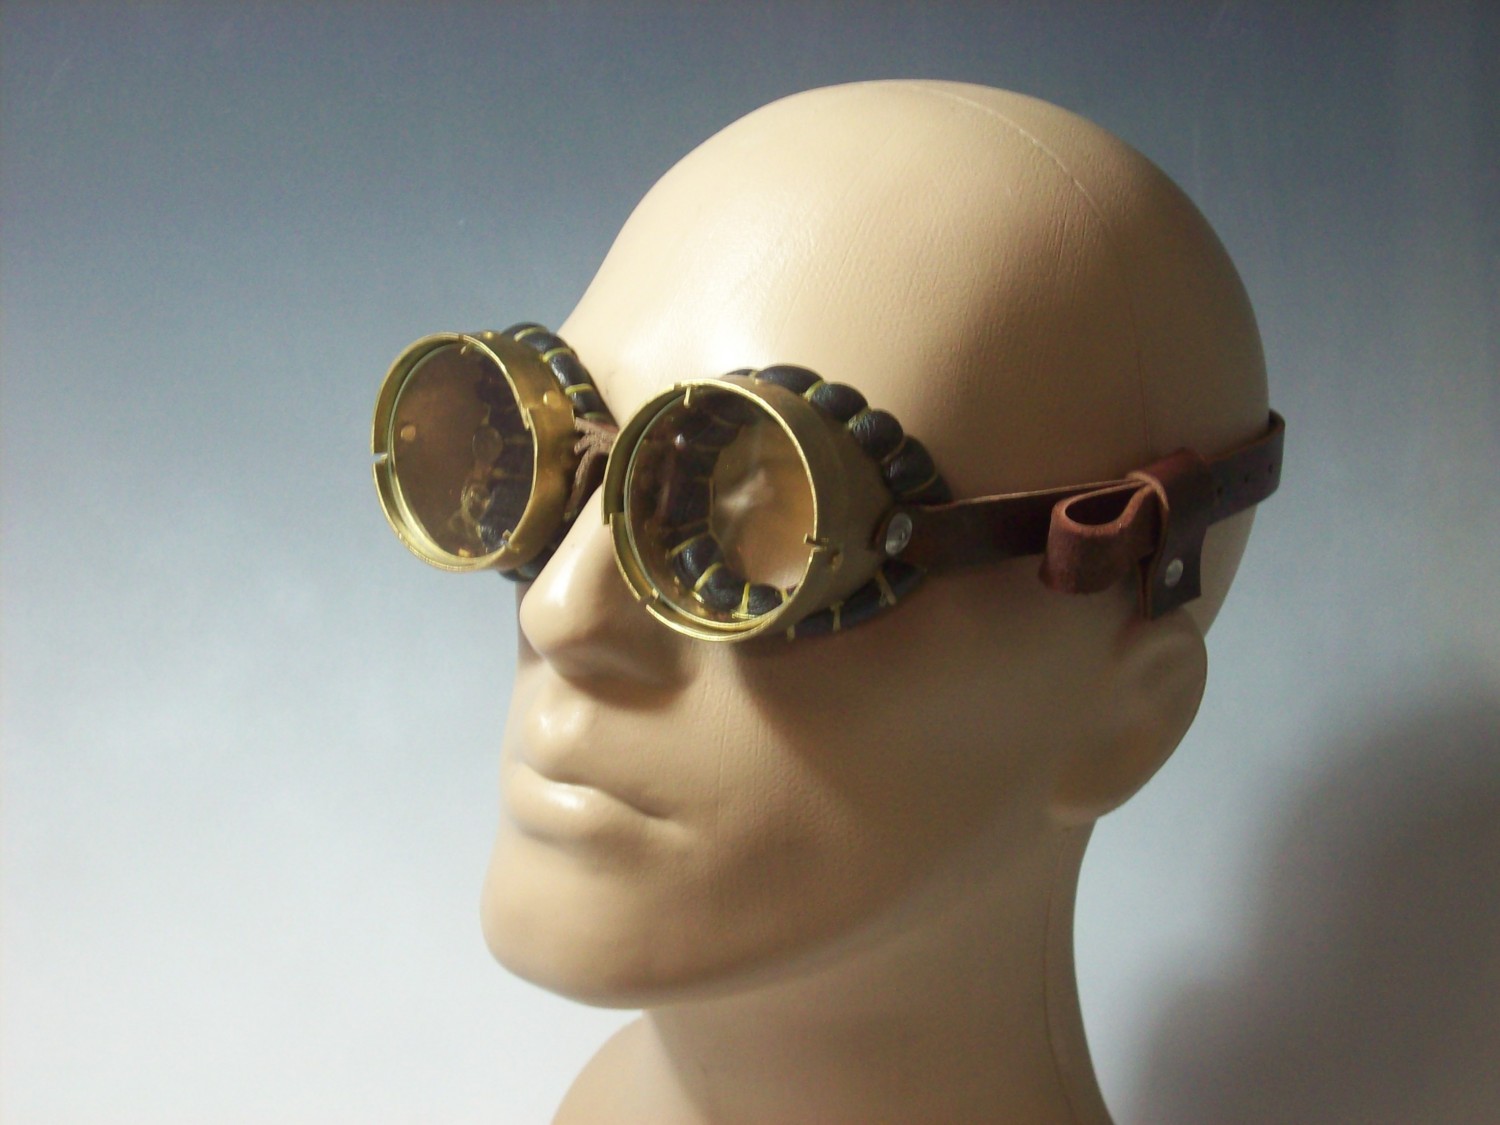 DISCONTINUED Rhode Island Novelty Light Up Mad Scientist Steampunk Black Goggles 